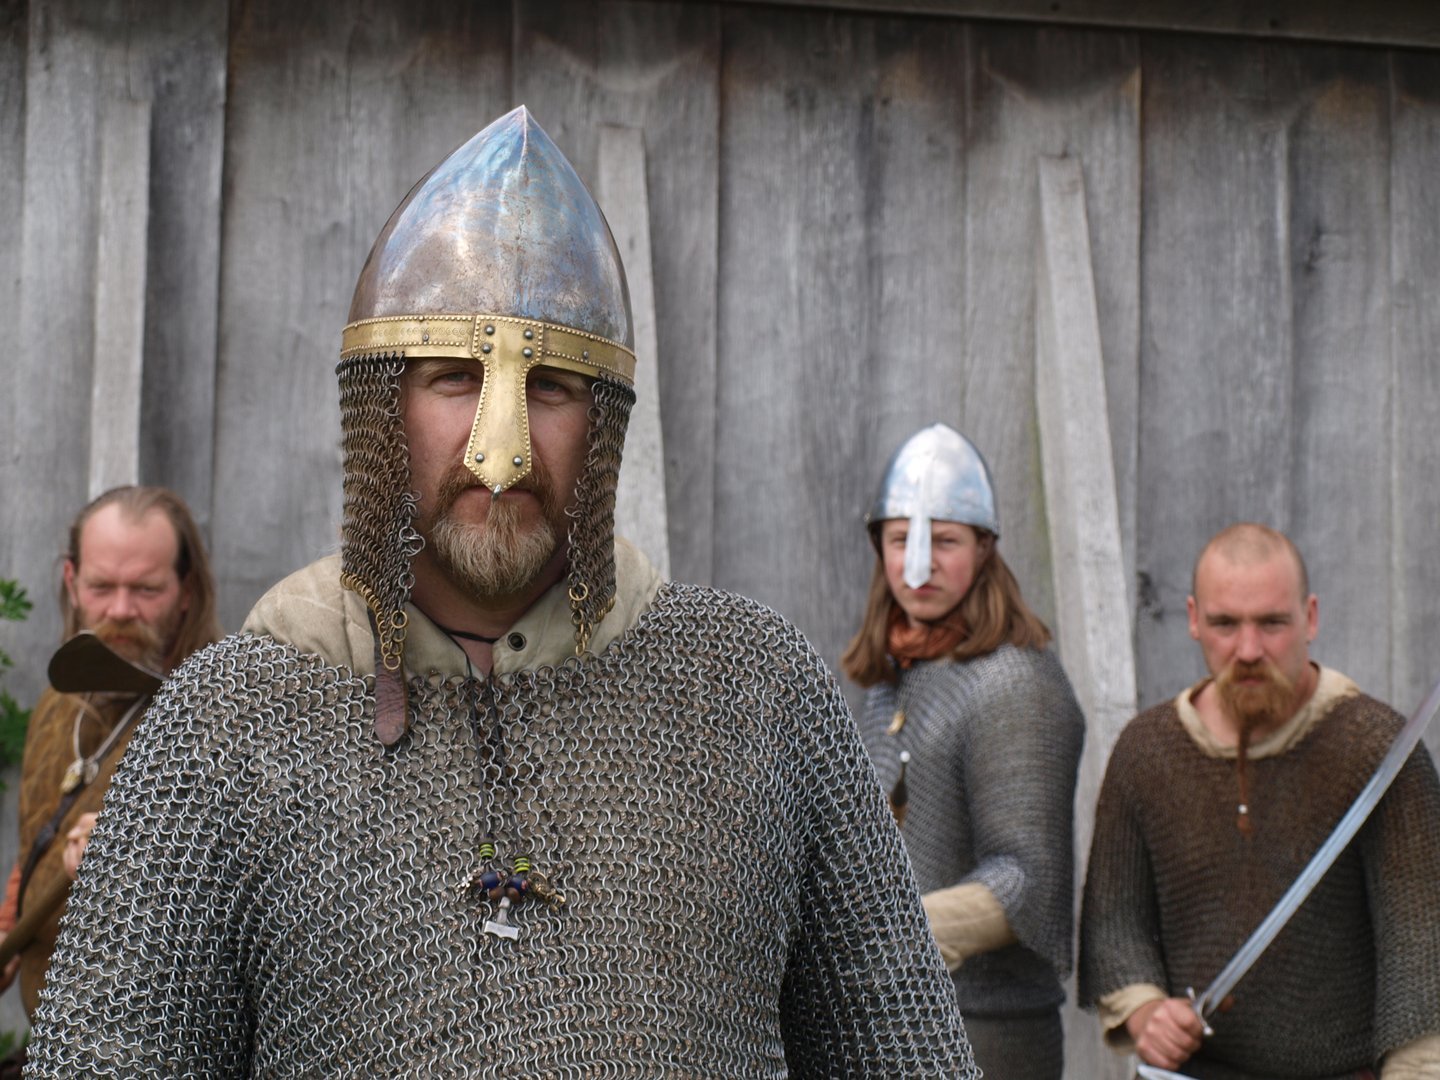 Facts and myths about Denmark's Vikings